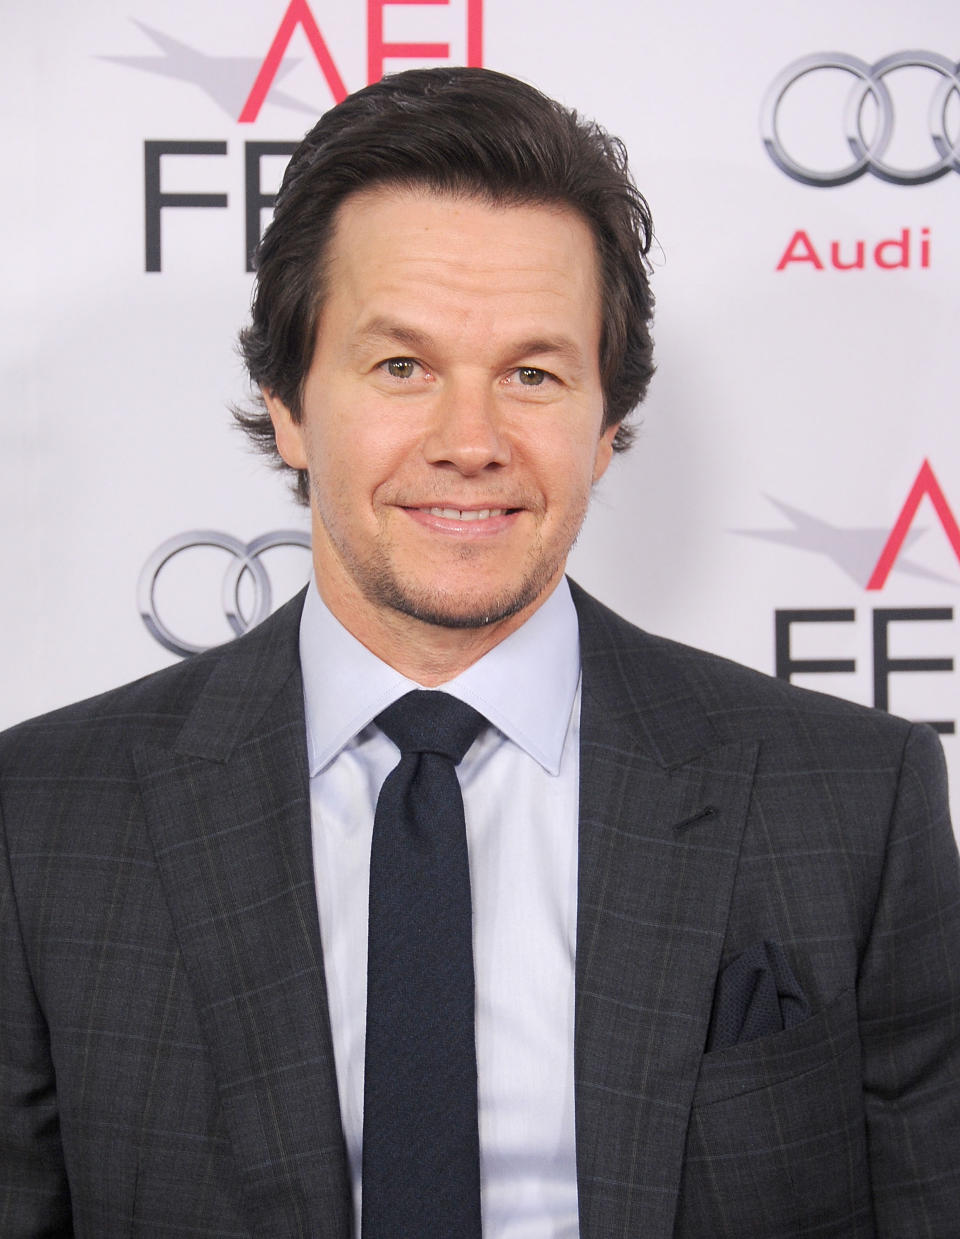 <p><b>"I just always hope that God is a movie fan and also forgiving because I've made some poor choices in my past."</b> — Mark Wahlberg, on <span>the movie missteps he's made in his career</span>, to Chicago Inc</p>